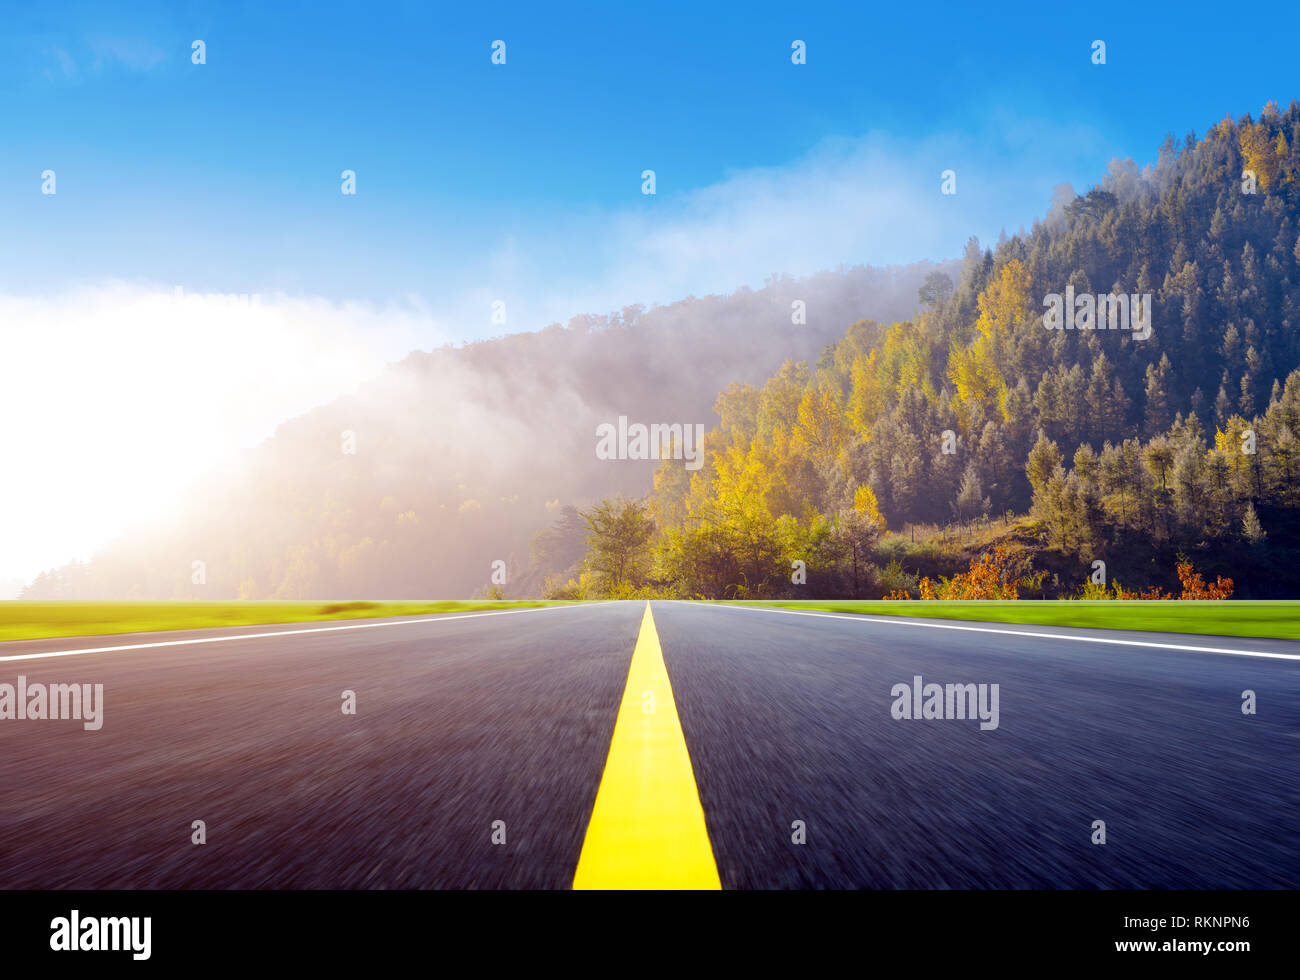 The highway leads to the distant mountains Stock Photo